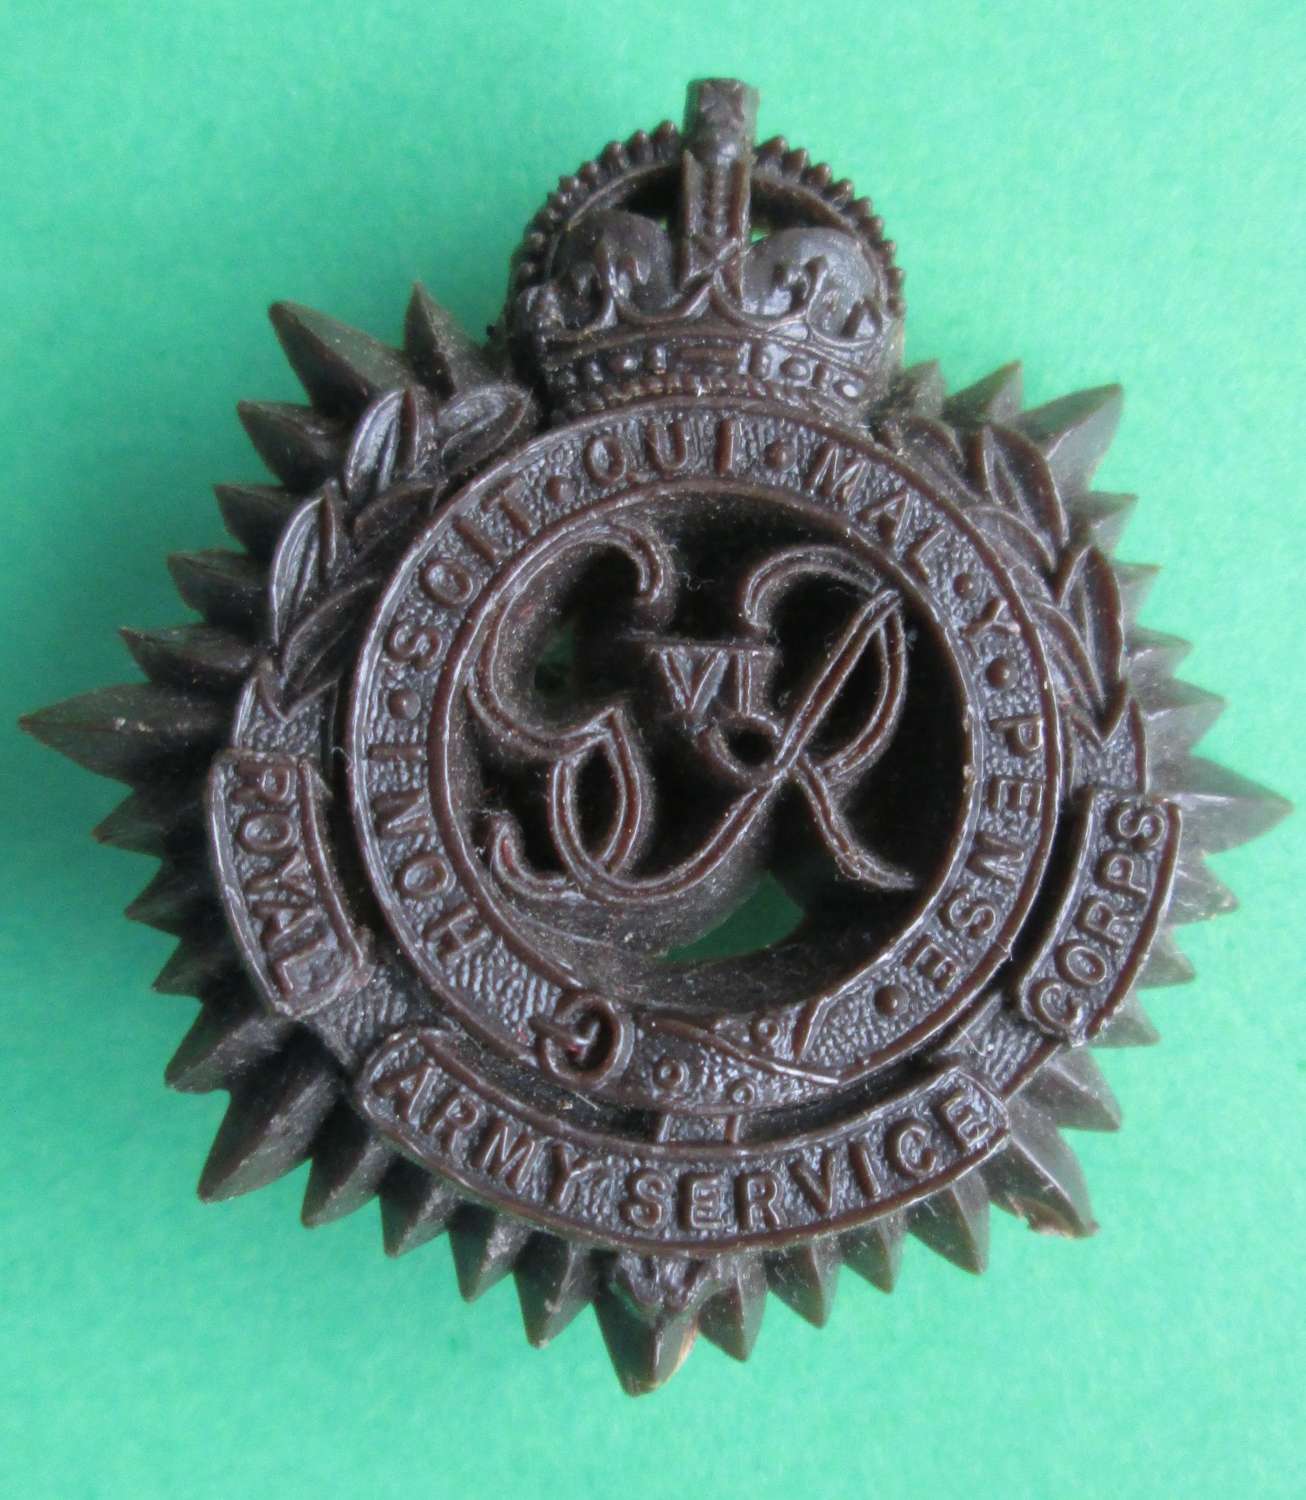 PLASTIC ROYAL ARMY SERVICE CORPS CAP BADGE